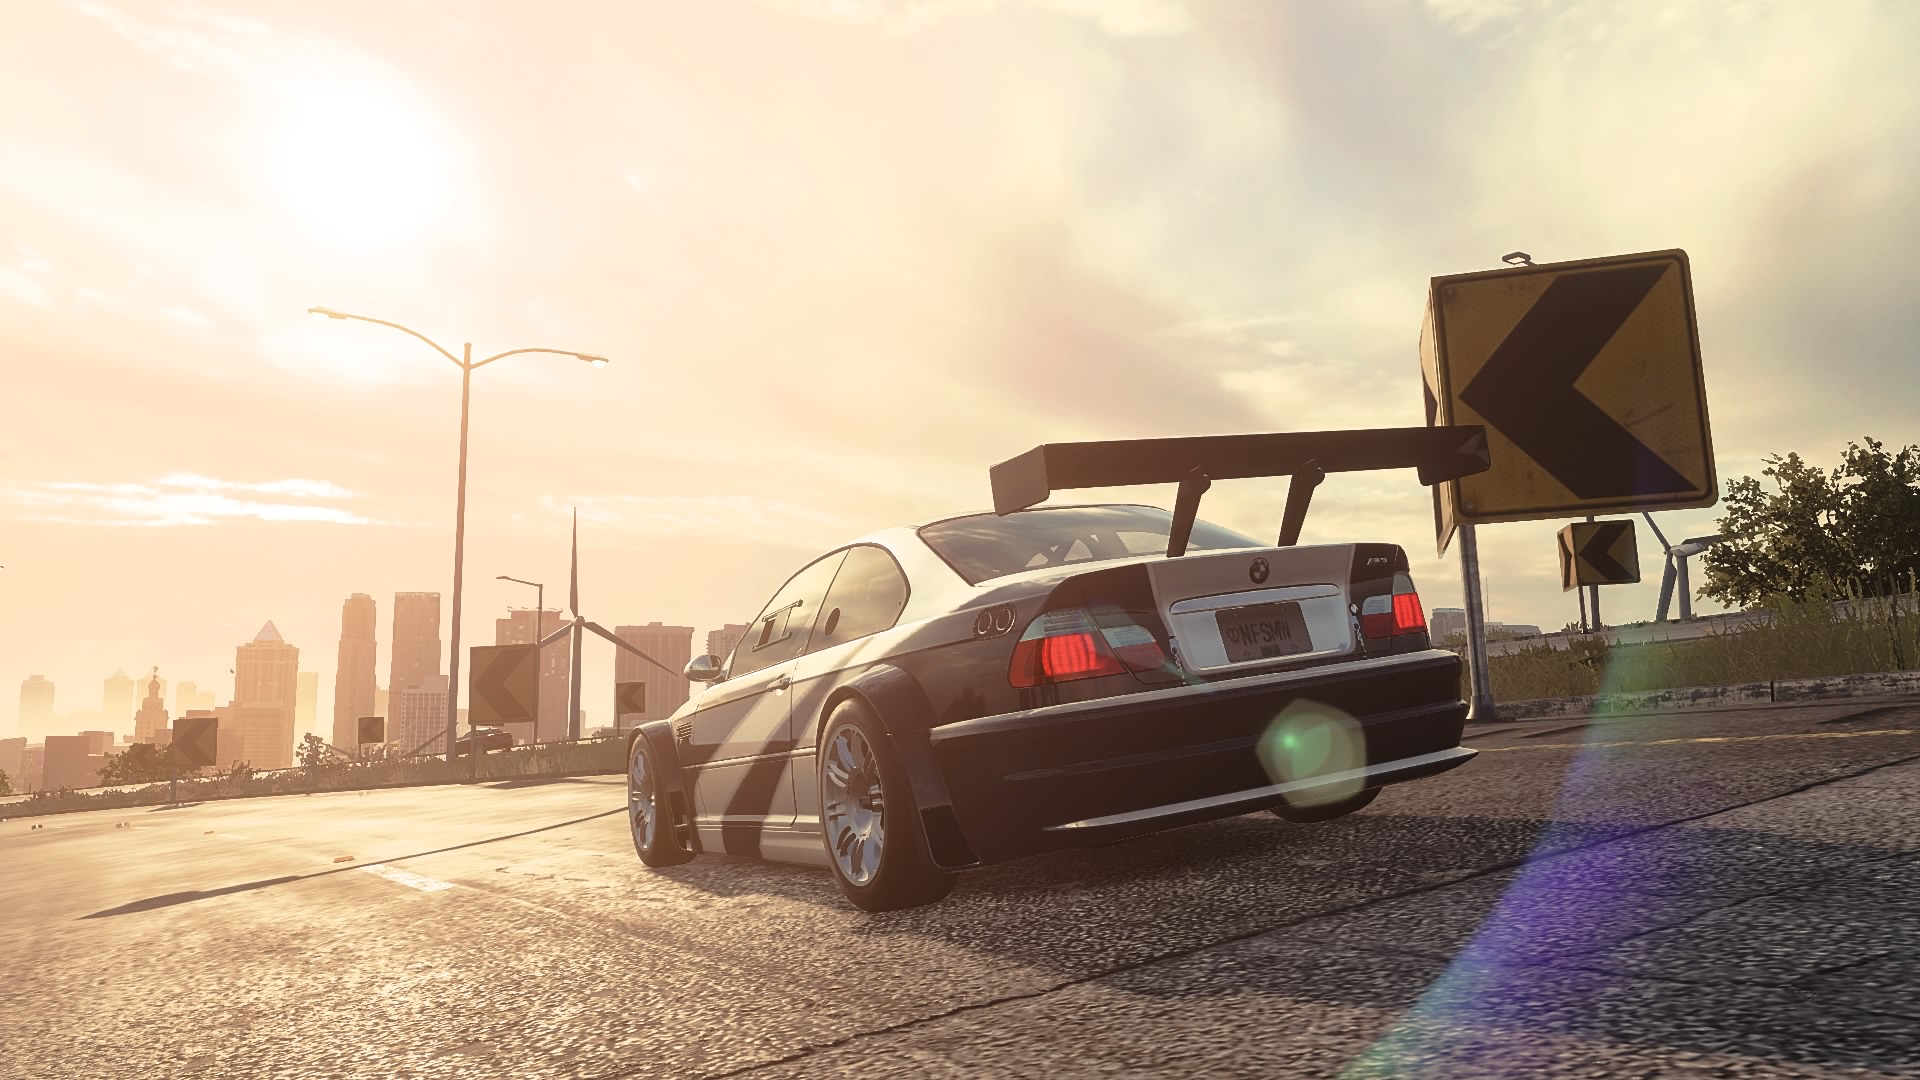 General 1920x1080 car Need for Speed: Heat Need for Speed: Most Wanted BMW M3 GTR windmill sunlight PlayStation 4 rear view taillights video game art screen shot arrow (design) clouds video games vehicle sky building CGI skyscraper licence plates